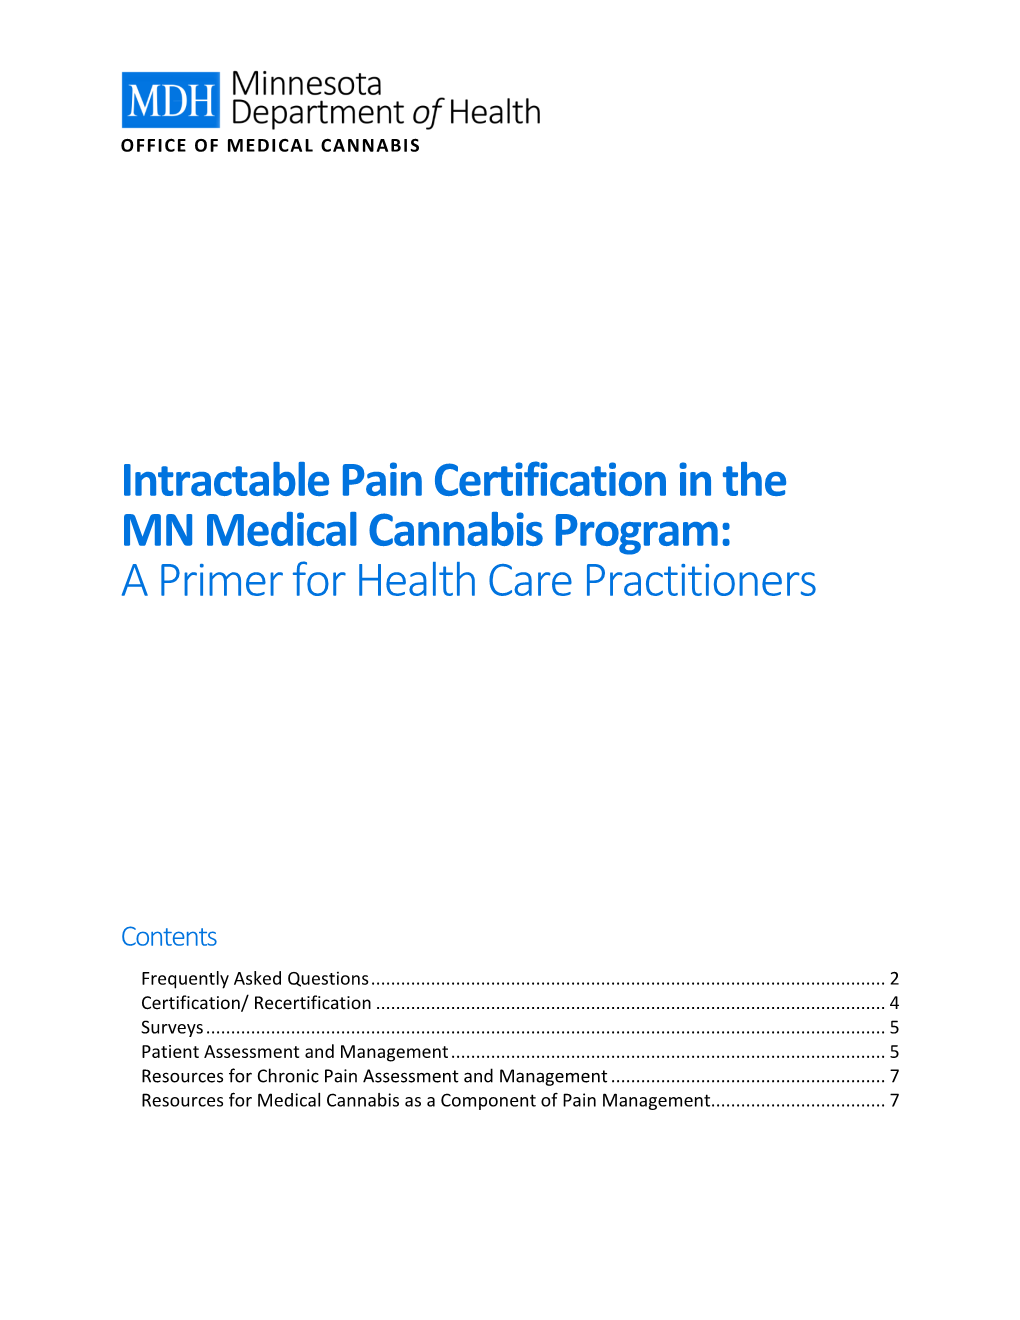 Intractable Pain Certification in the Minnesota Medical Cannabis